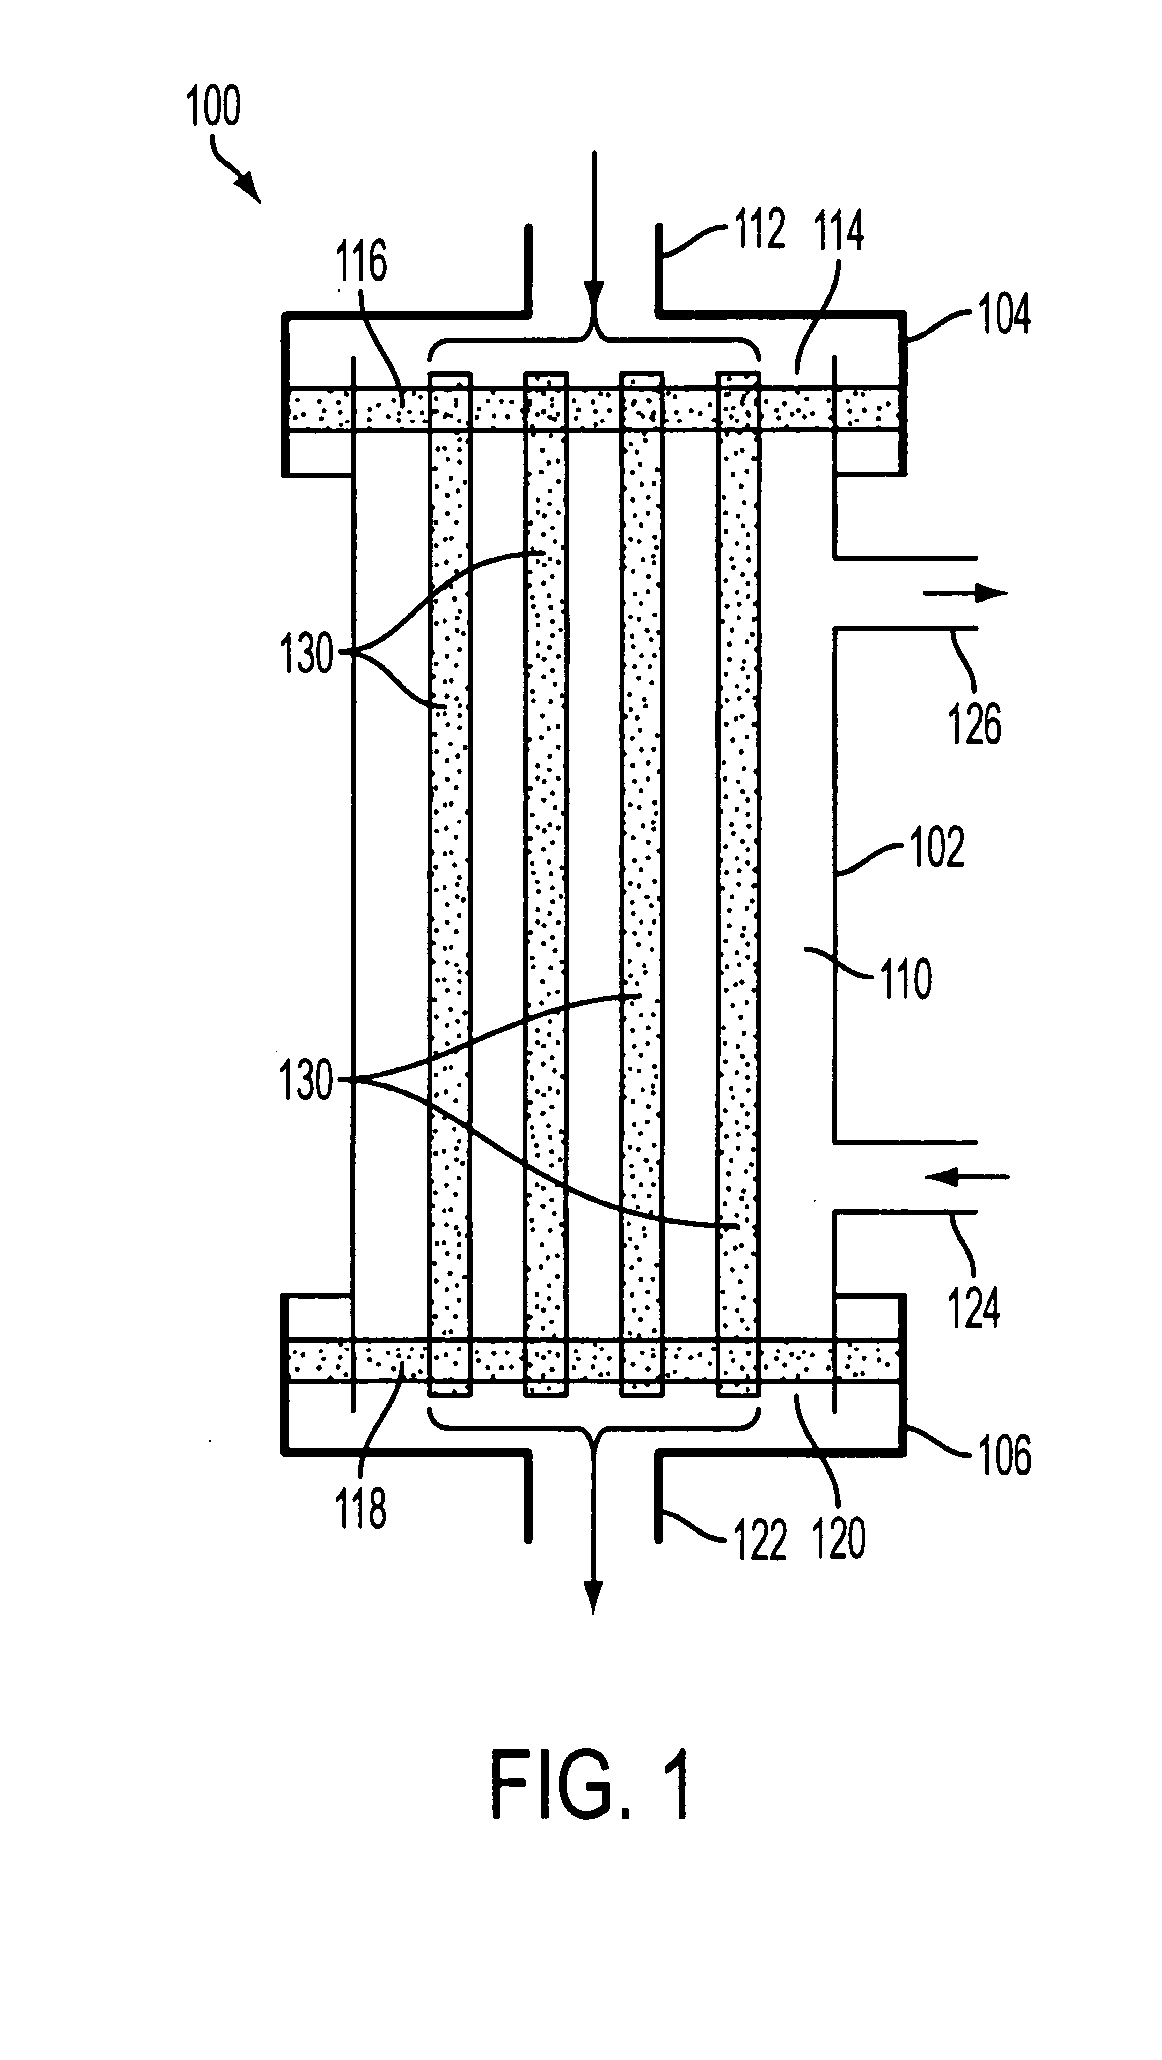 Apparatus and Method for Filtering Fluids